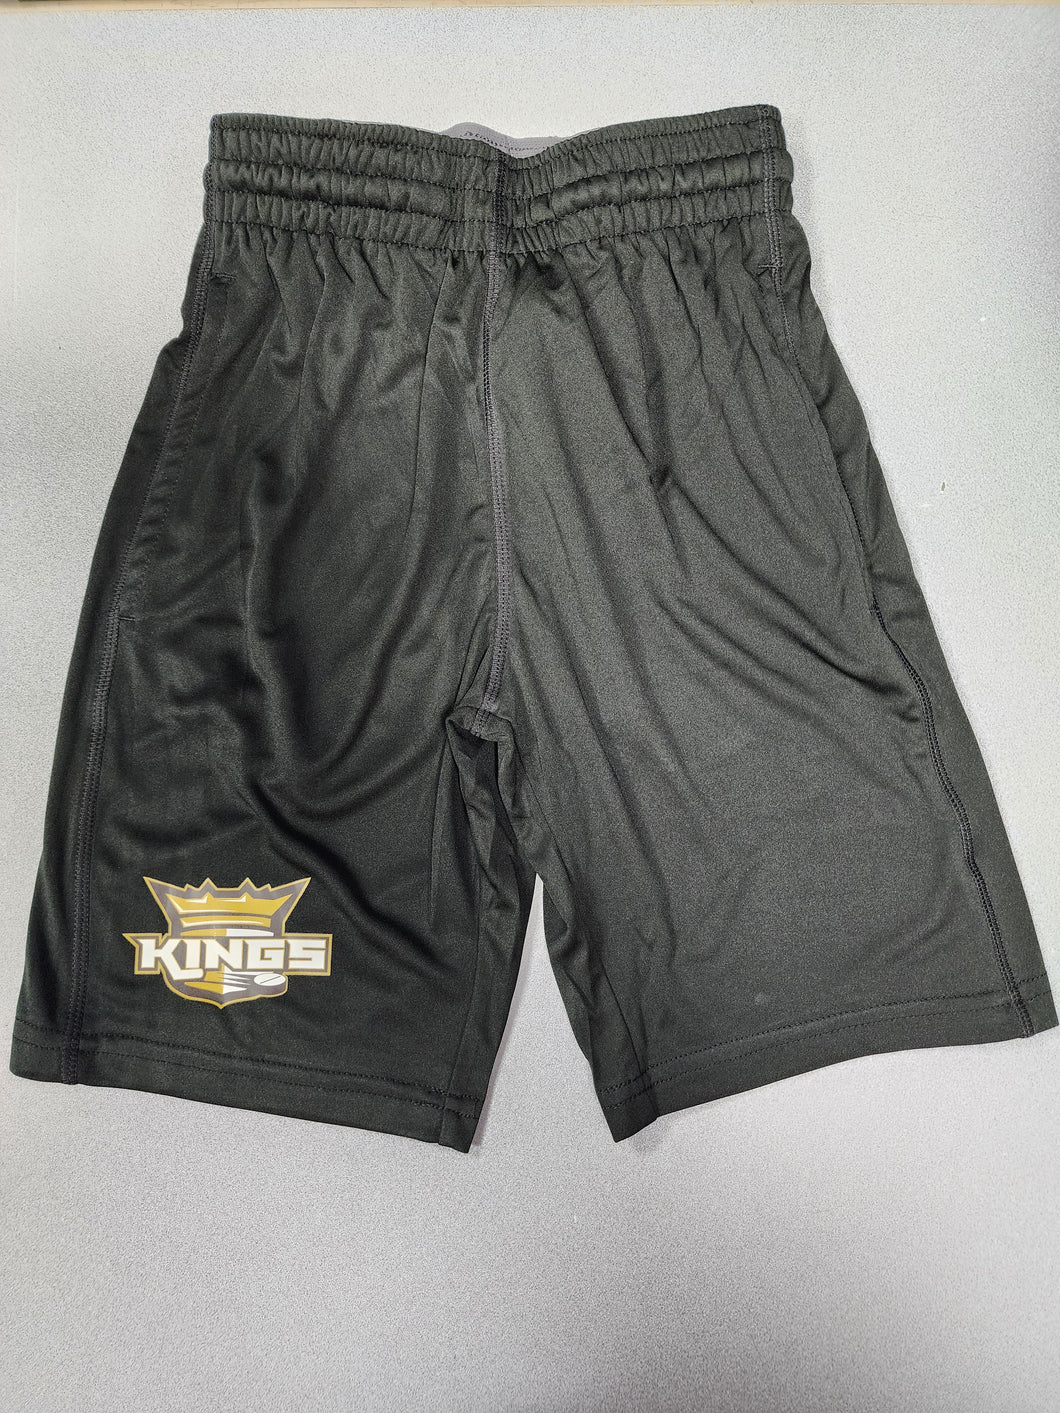 King's Youth Performance Shorts